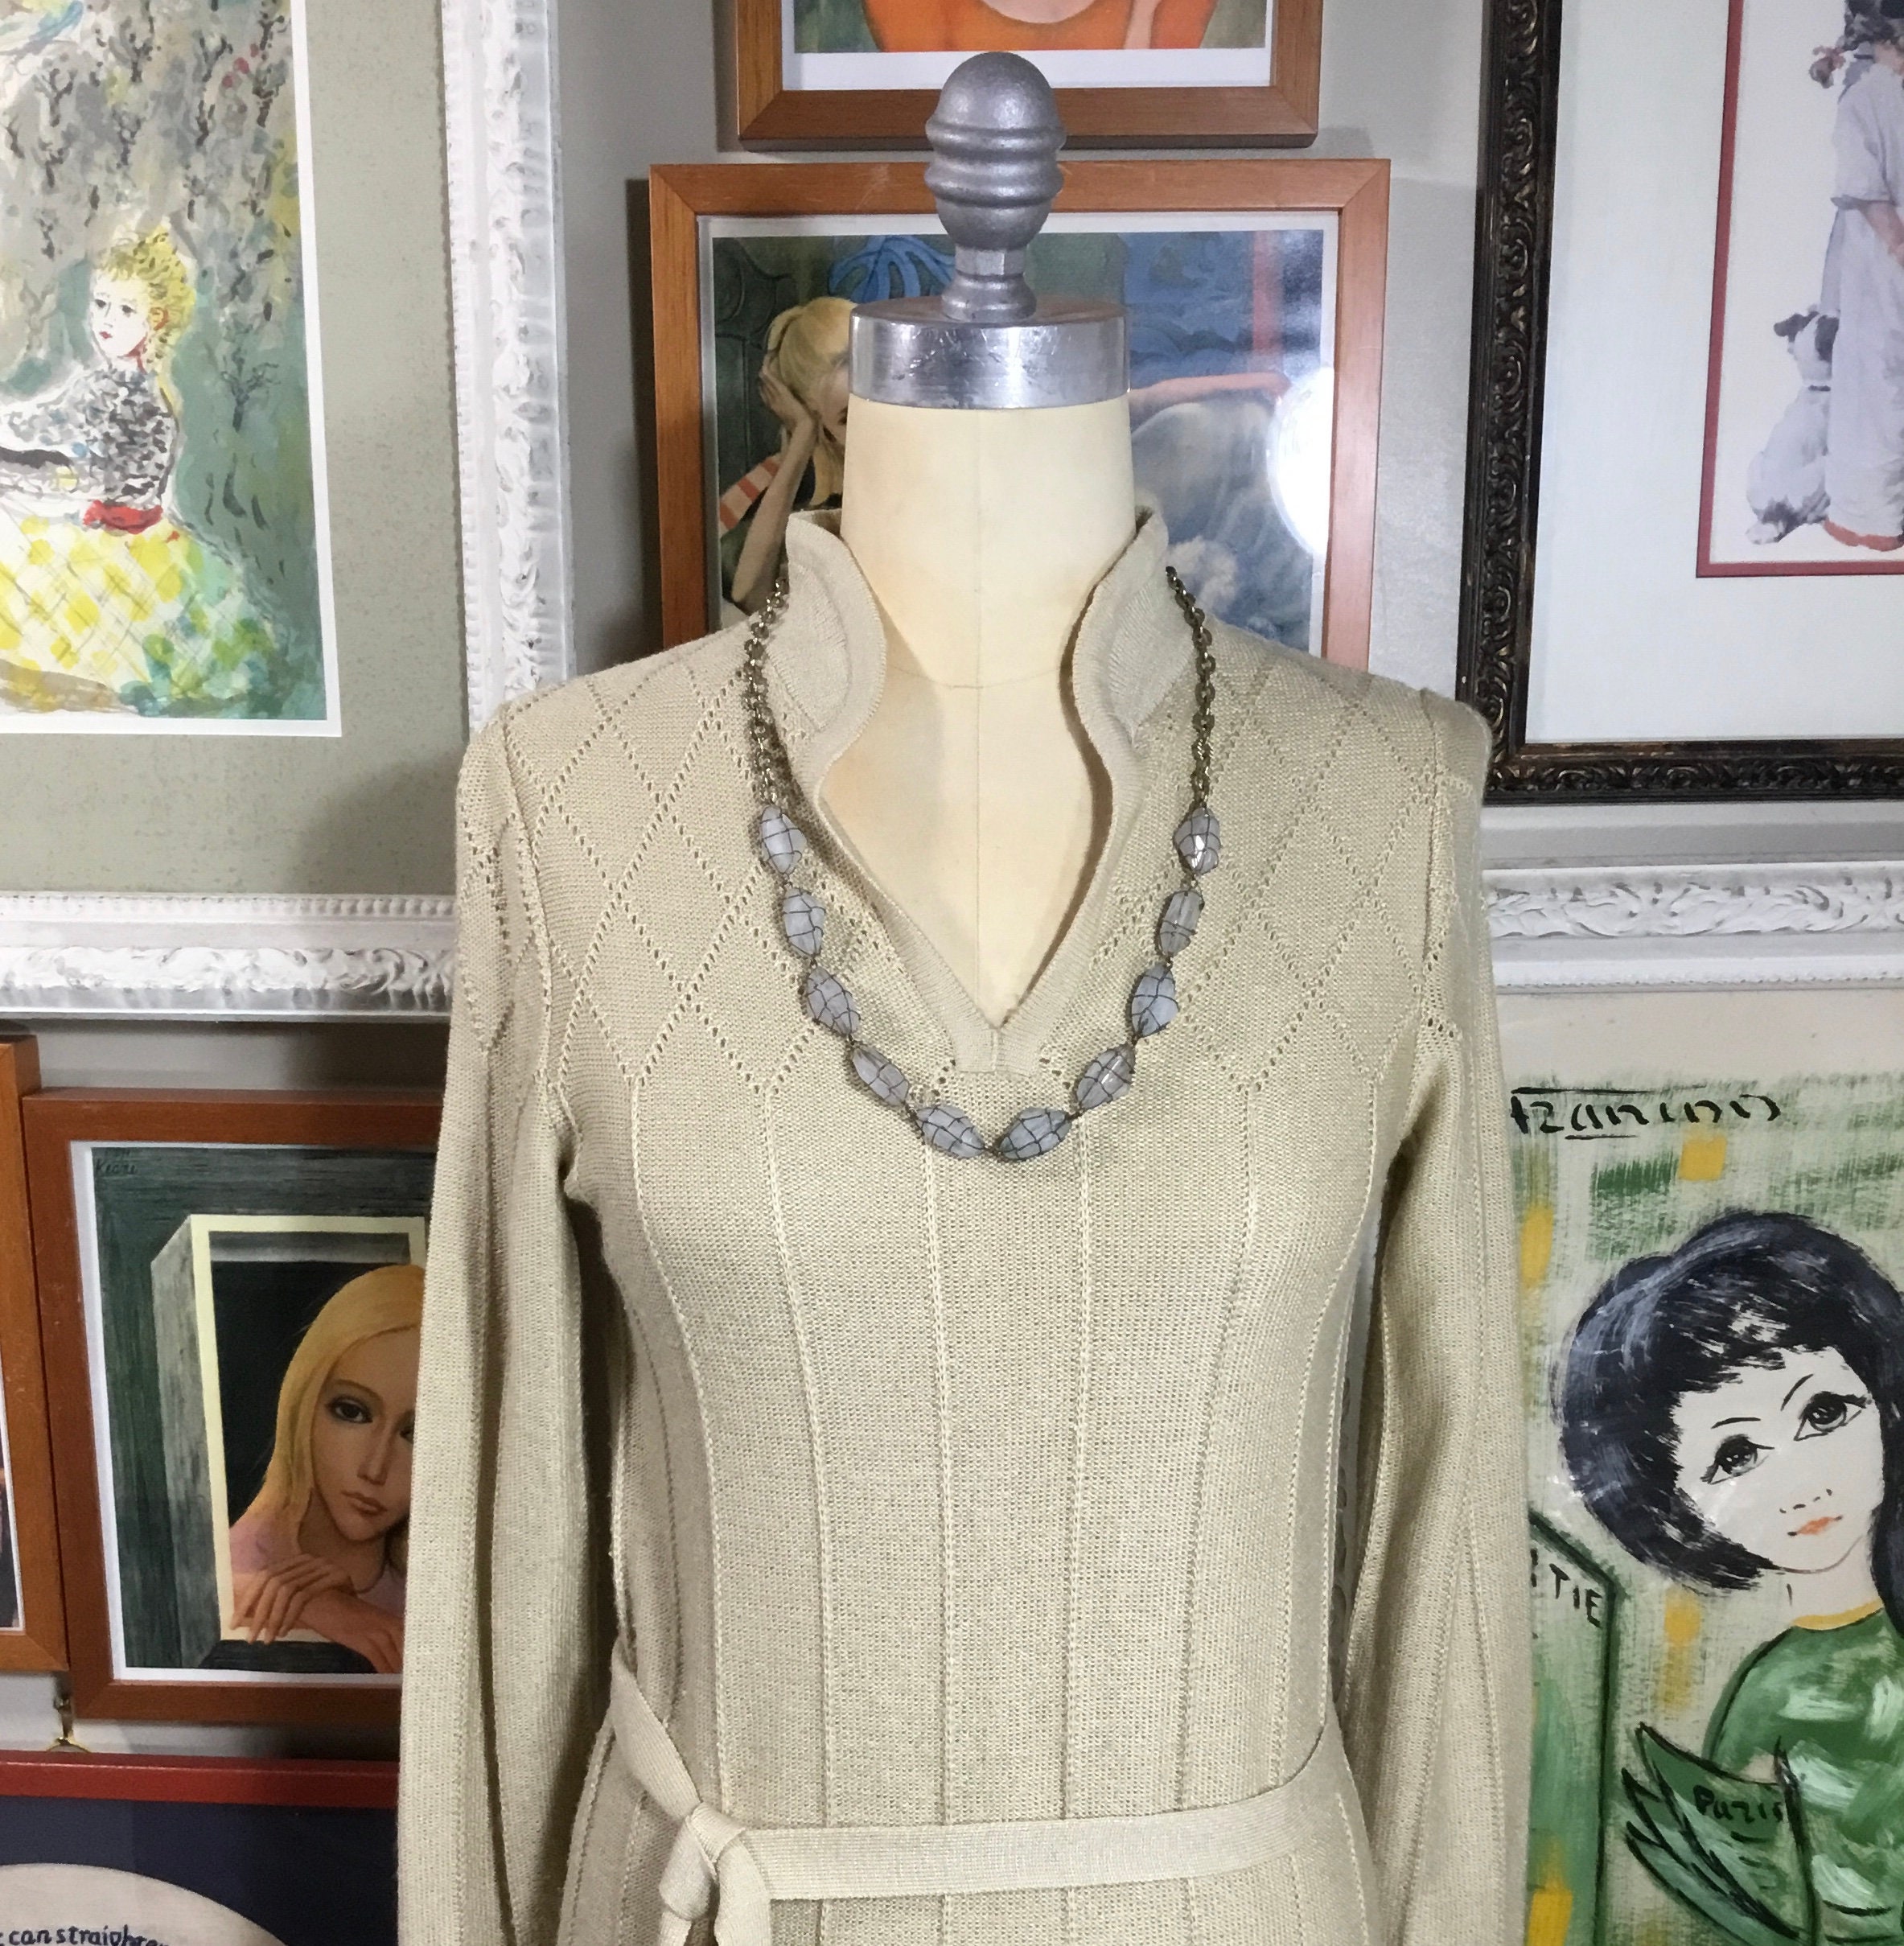 60s -70s Jewelry – Necklaces, Earrings, Rings, Bracelets Schrader Sport Knit 1960s Sweater Dress $65.00 AT vintagedancer.com